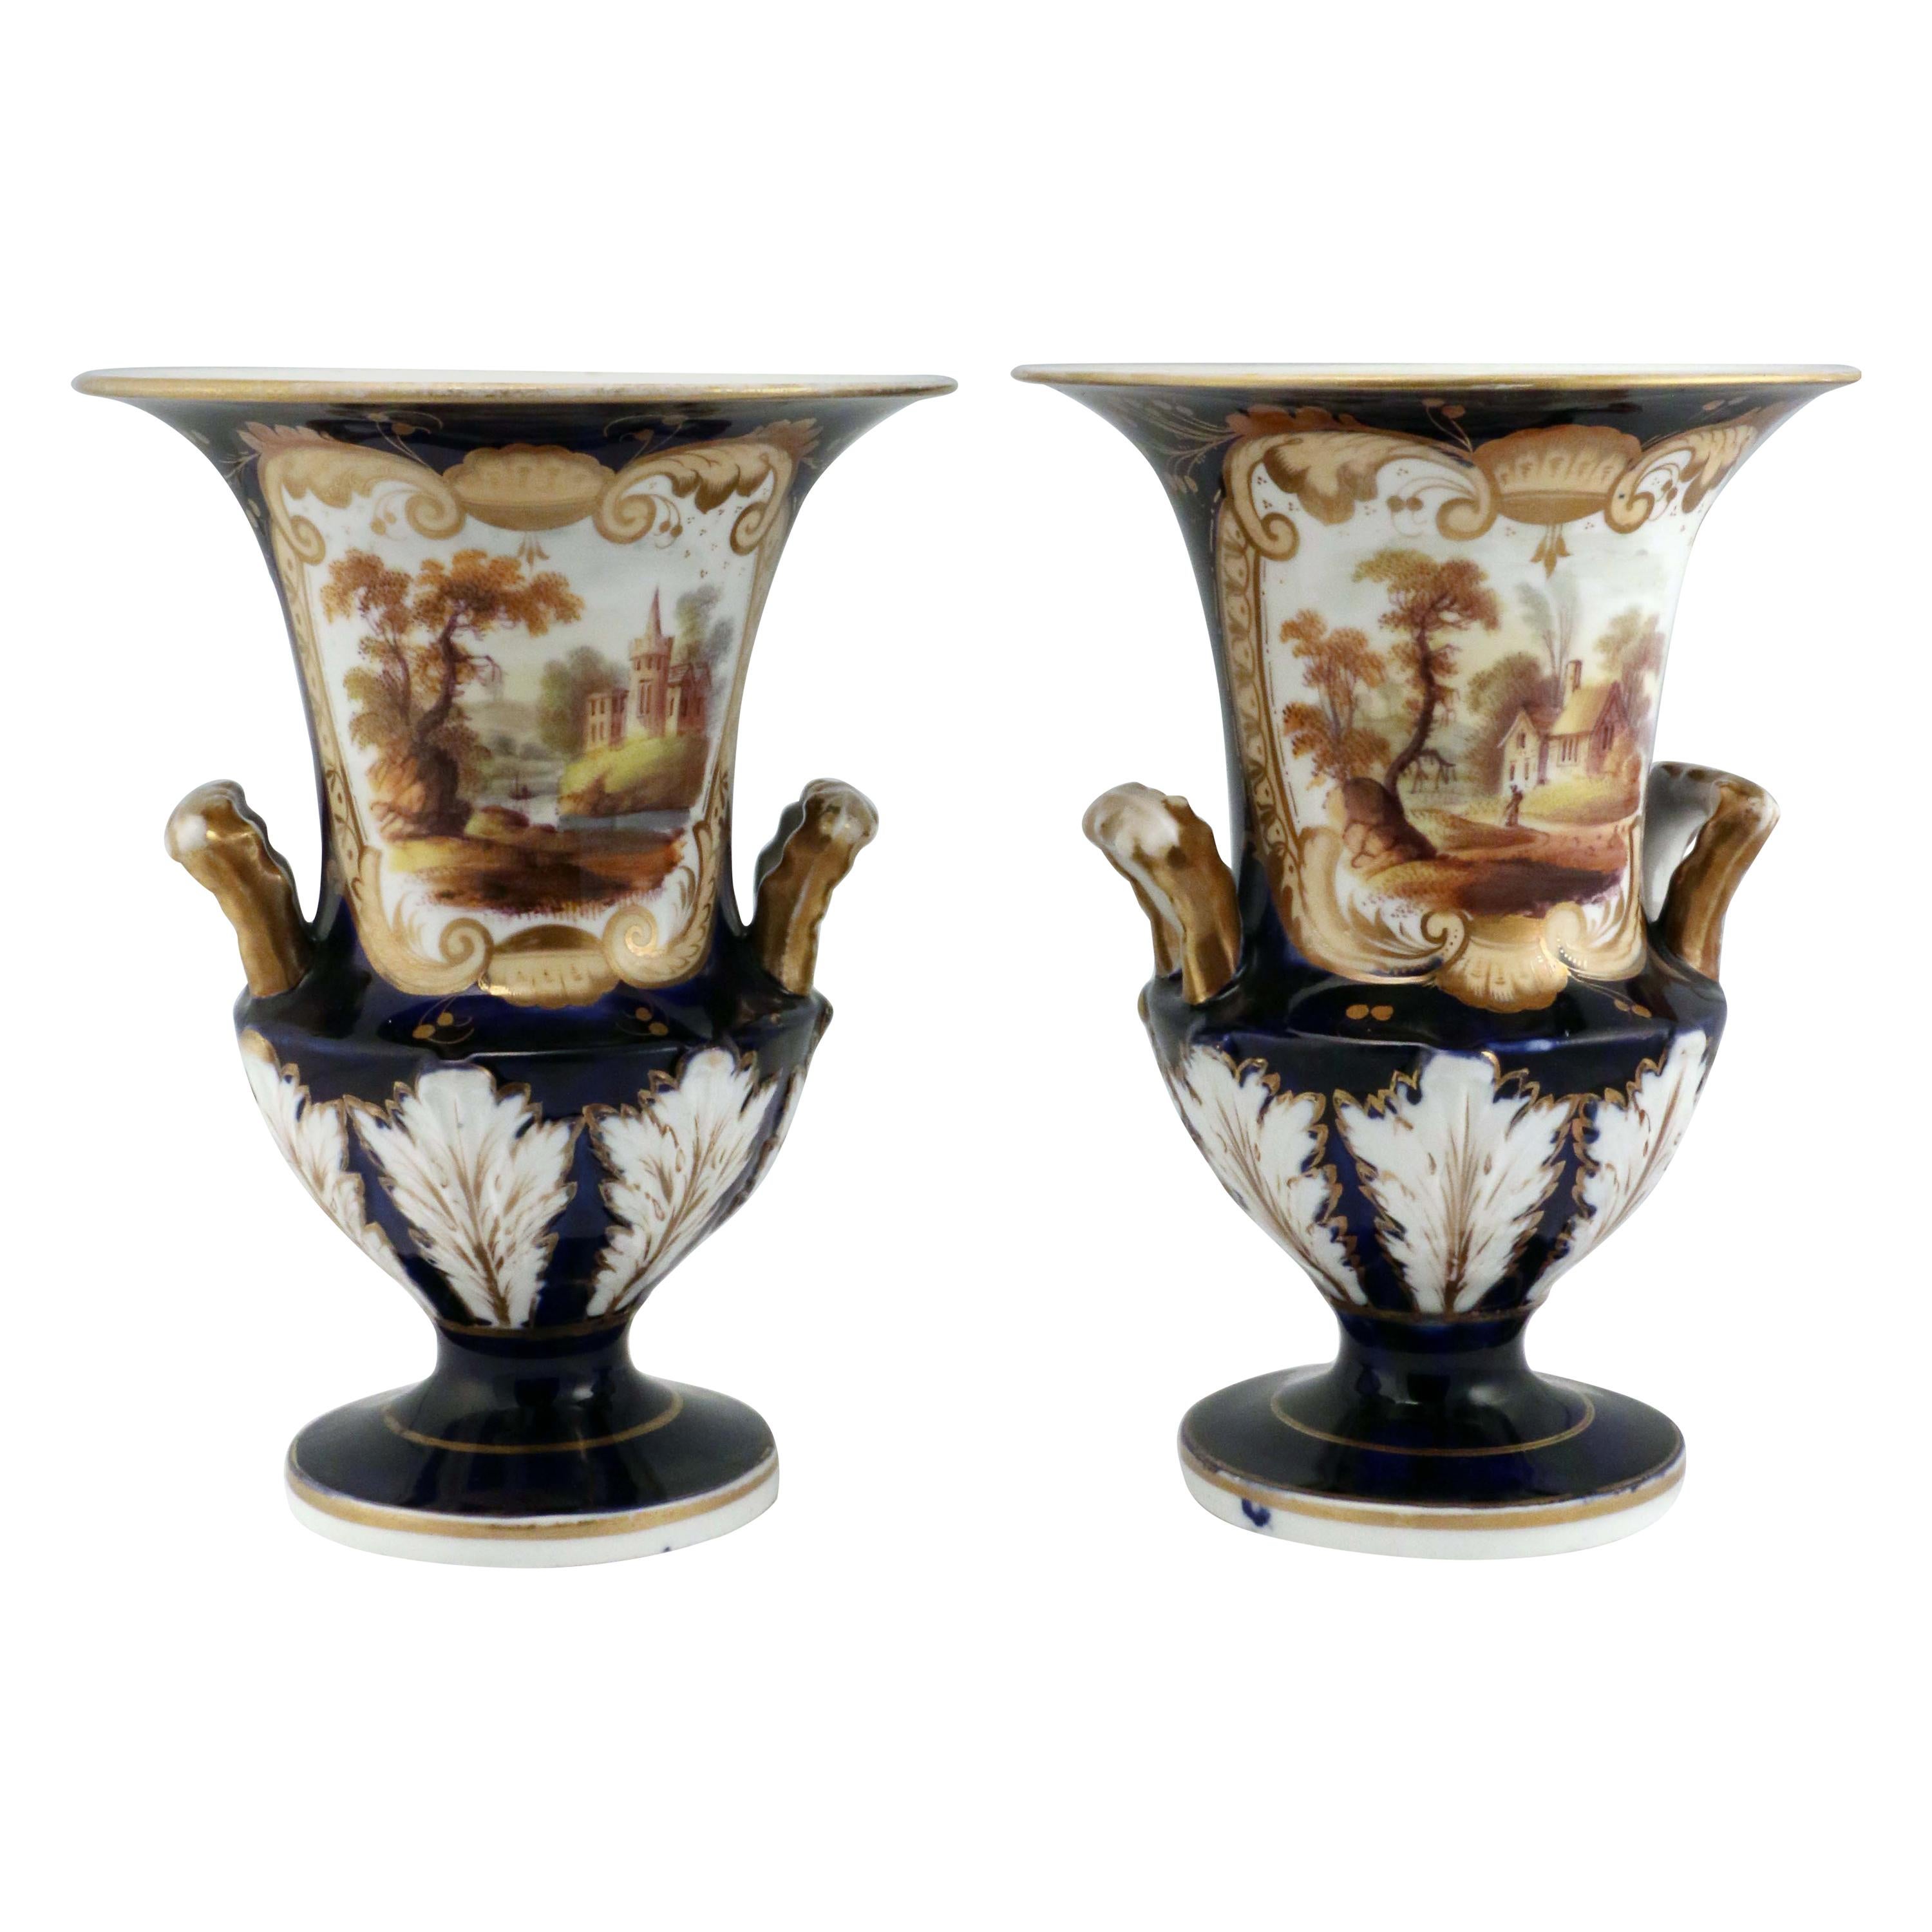 Pair of English Antique Porcelain Urns For Sale